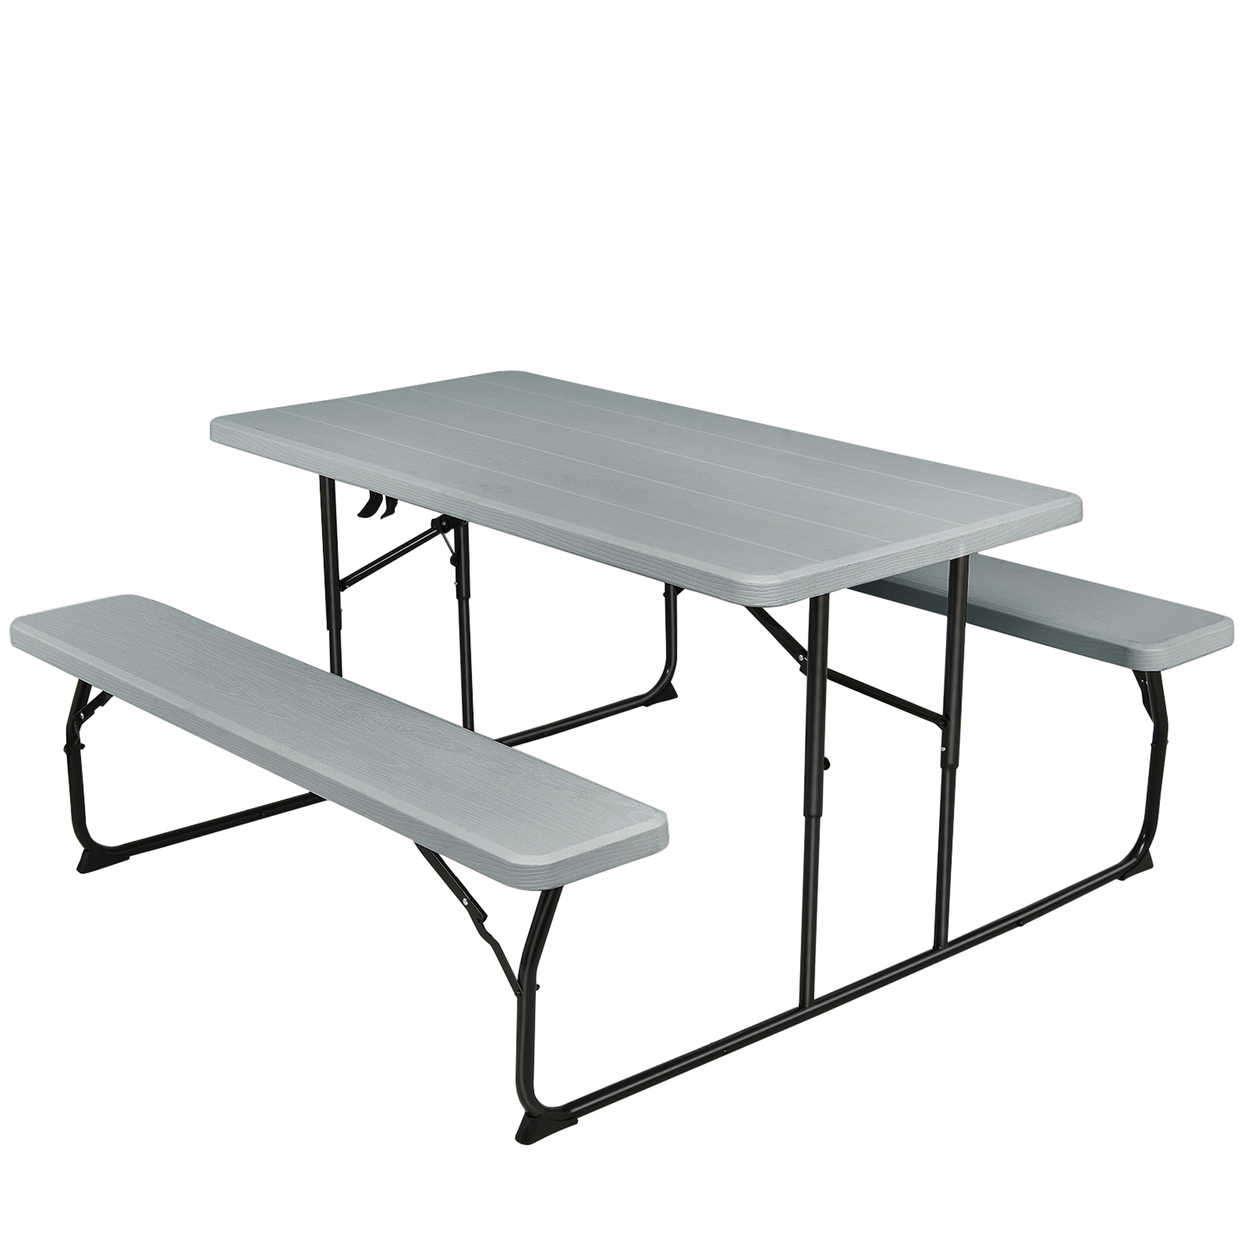 Folding Picnic Table & Bench Set For Camping BBQ W/ Steel Frame - Grey